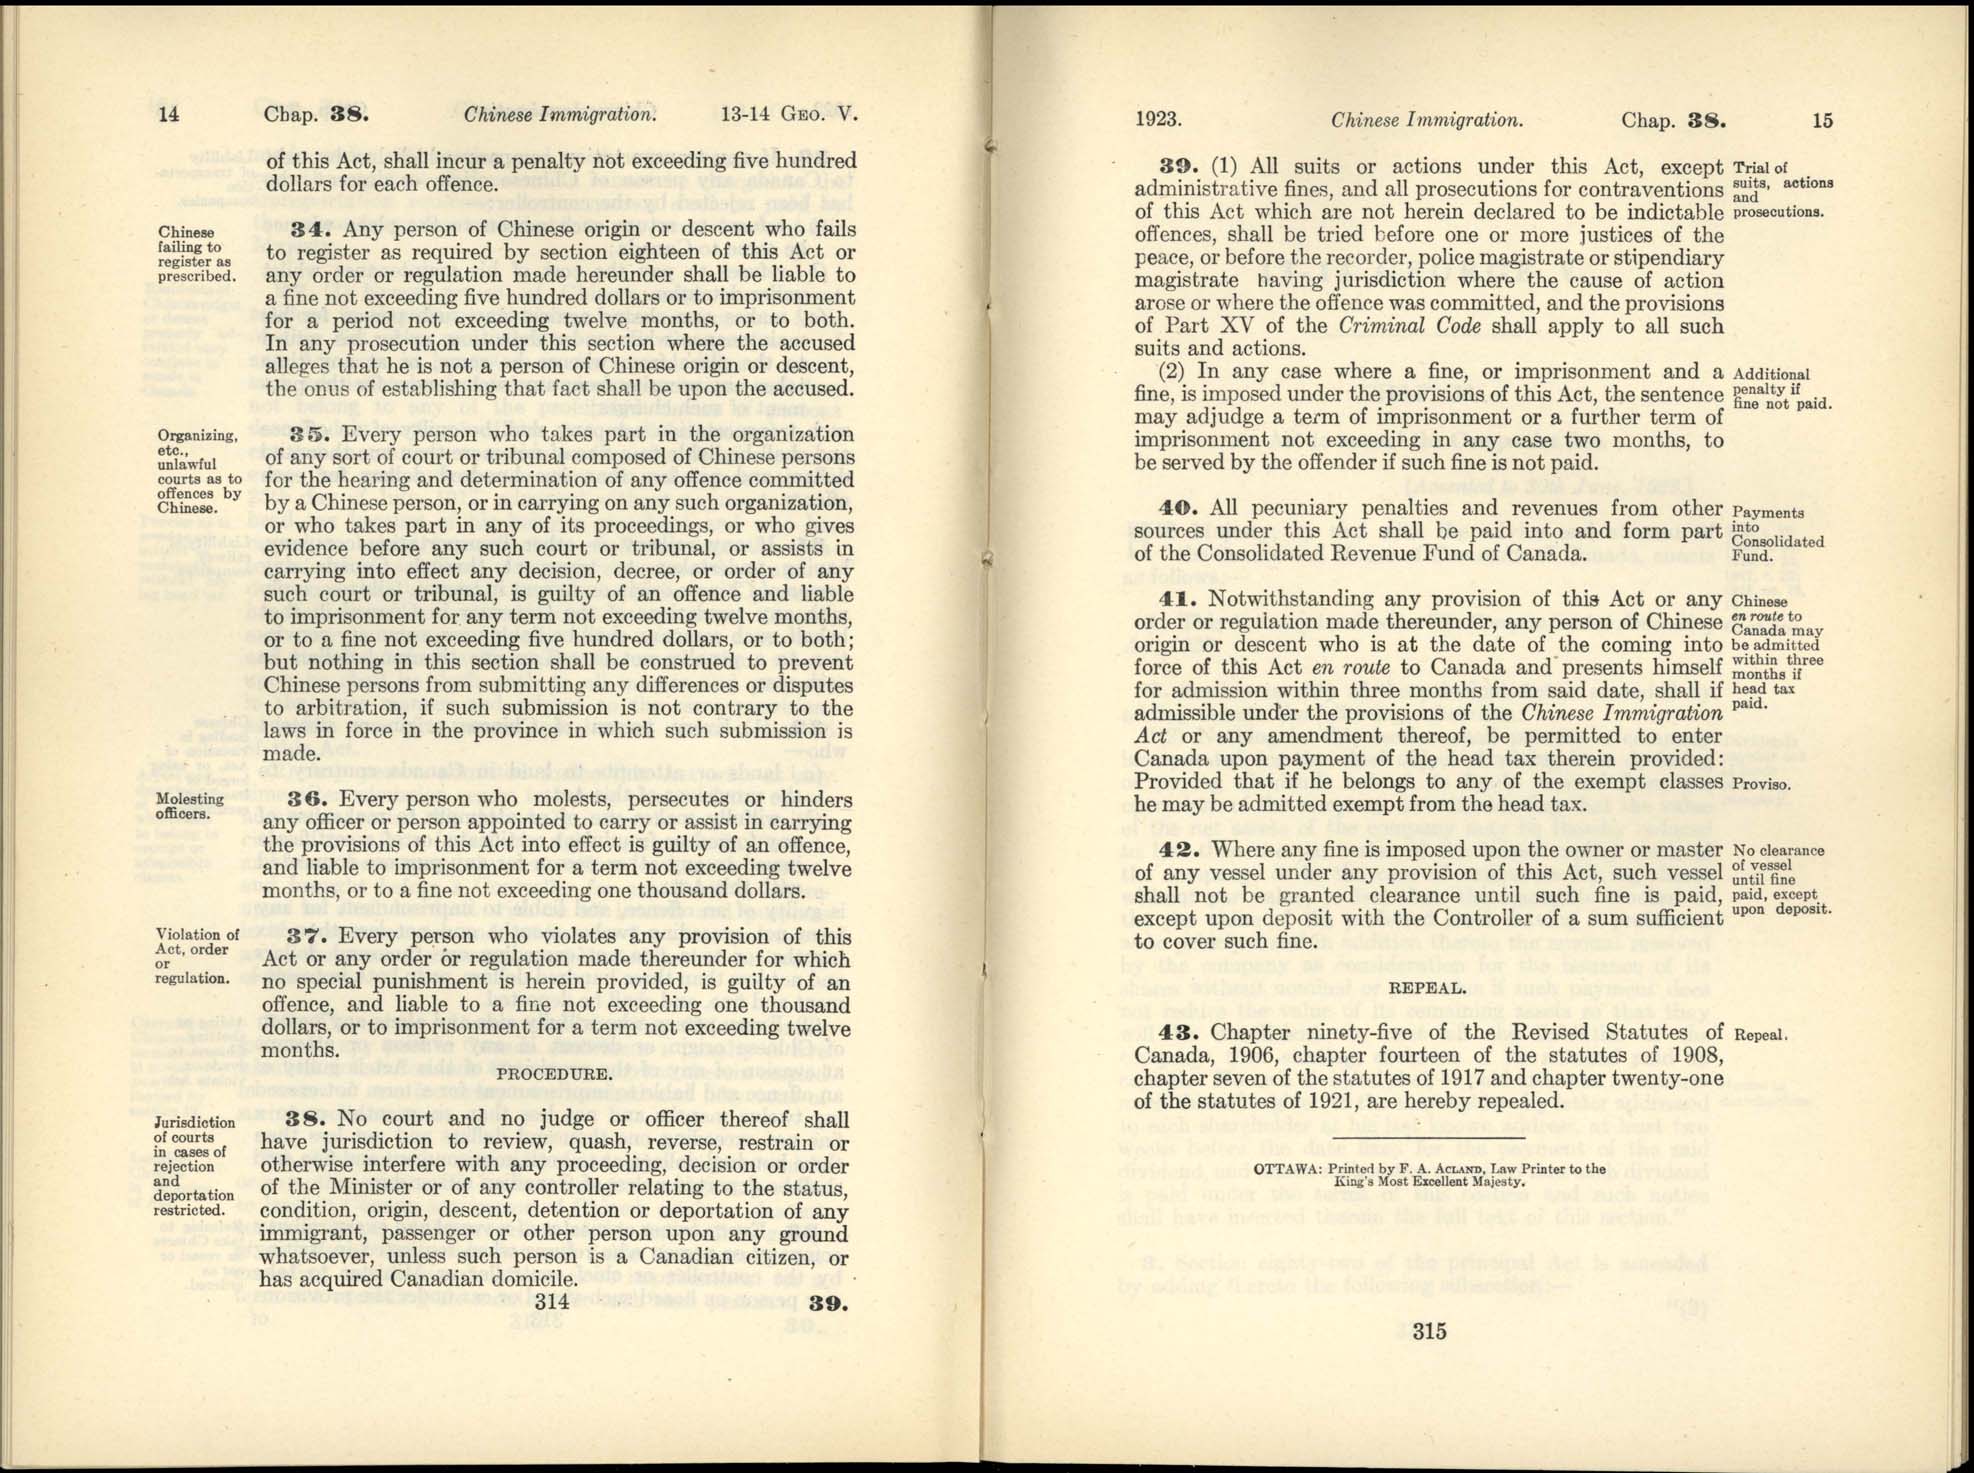 Page 314, 315 Chinese Immigration Act, 1923